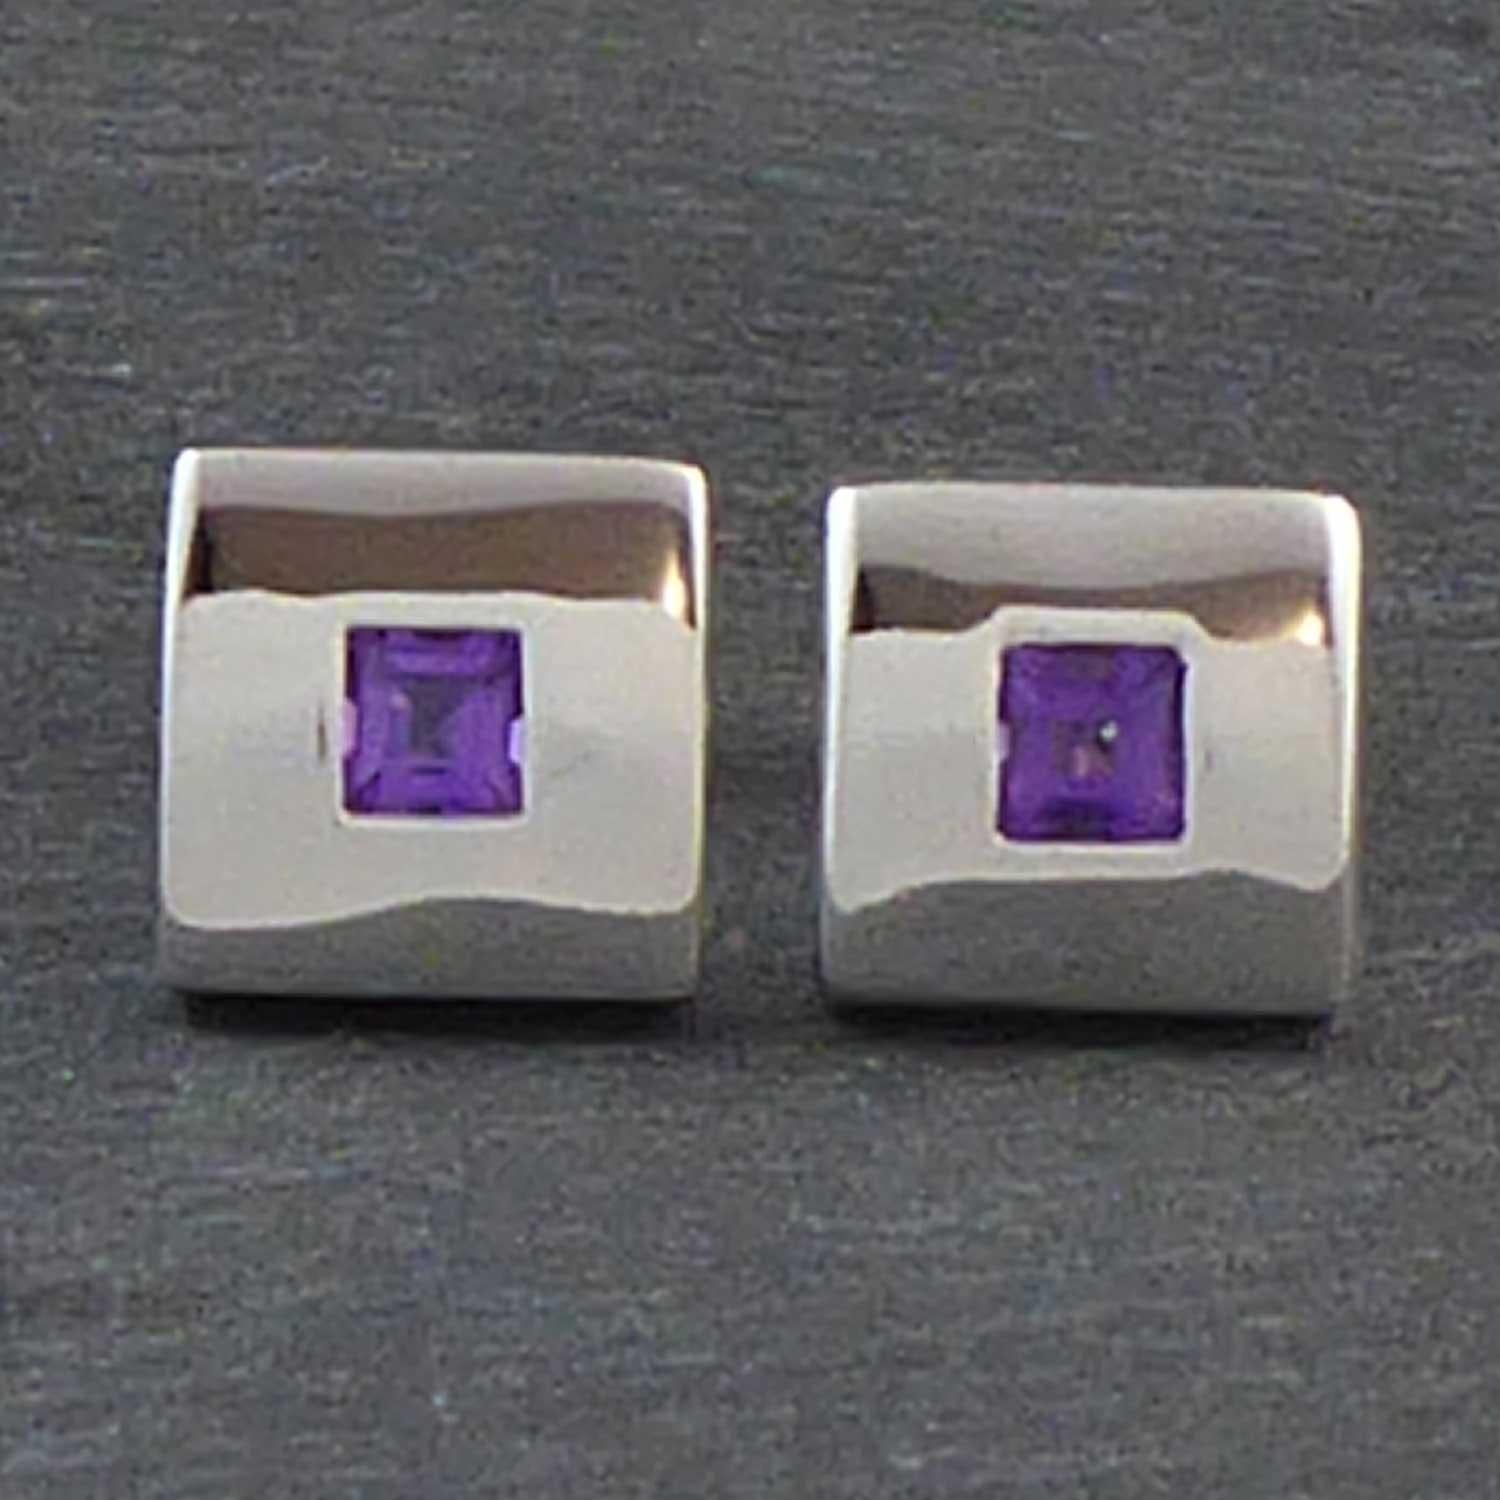 Contemporary Amethyst Stud Earrings, 18 Carat White Gold In Good Condition In Yorkshire, West Yorkshire